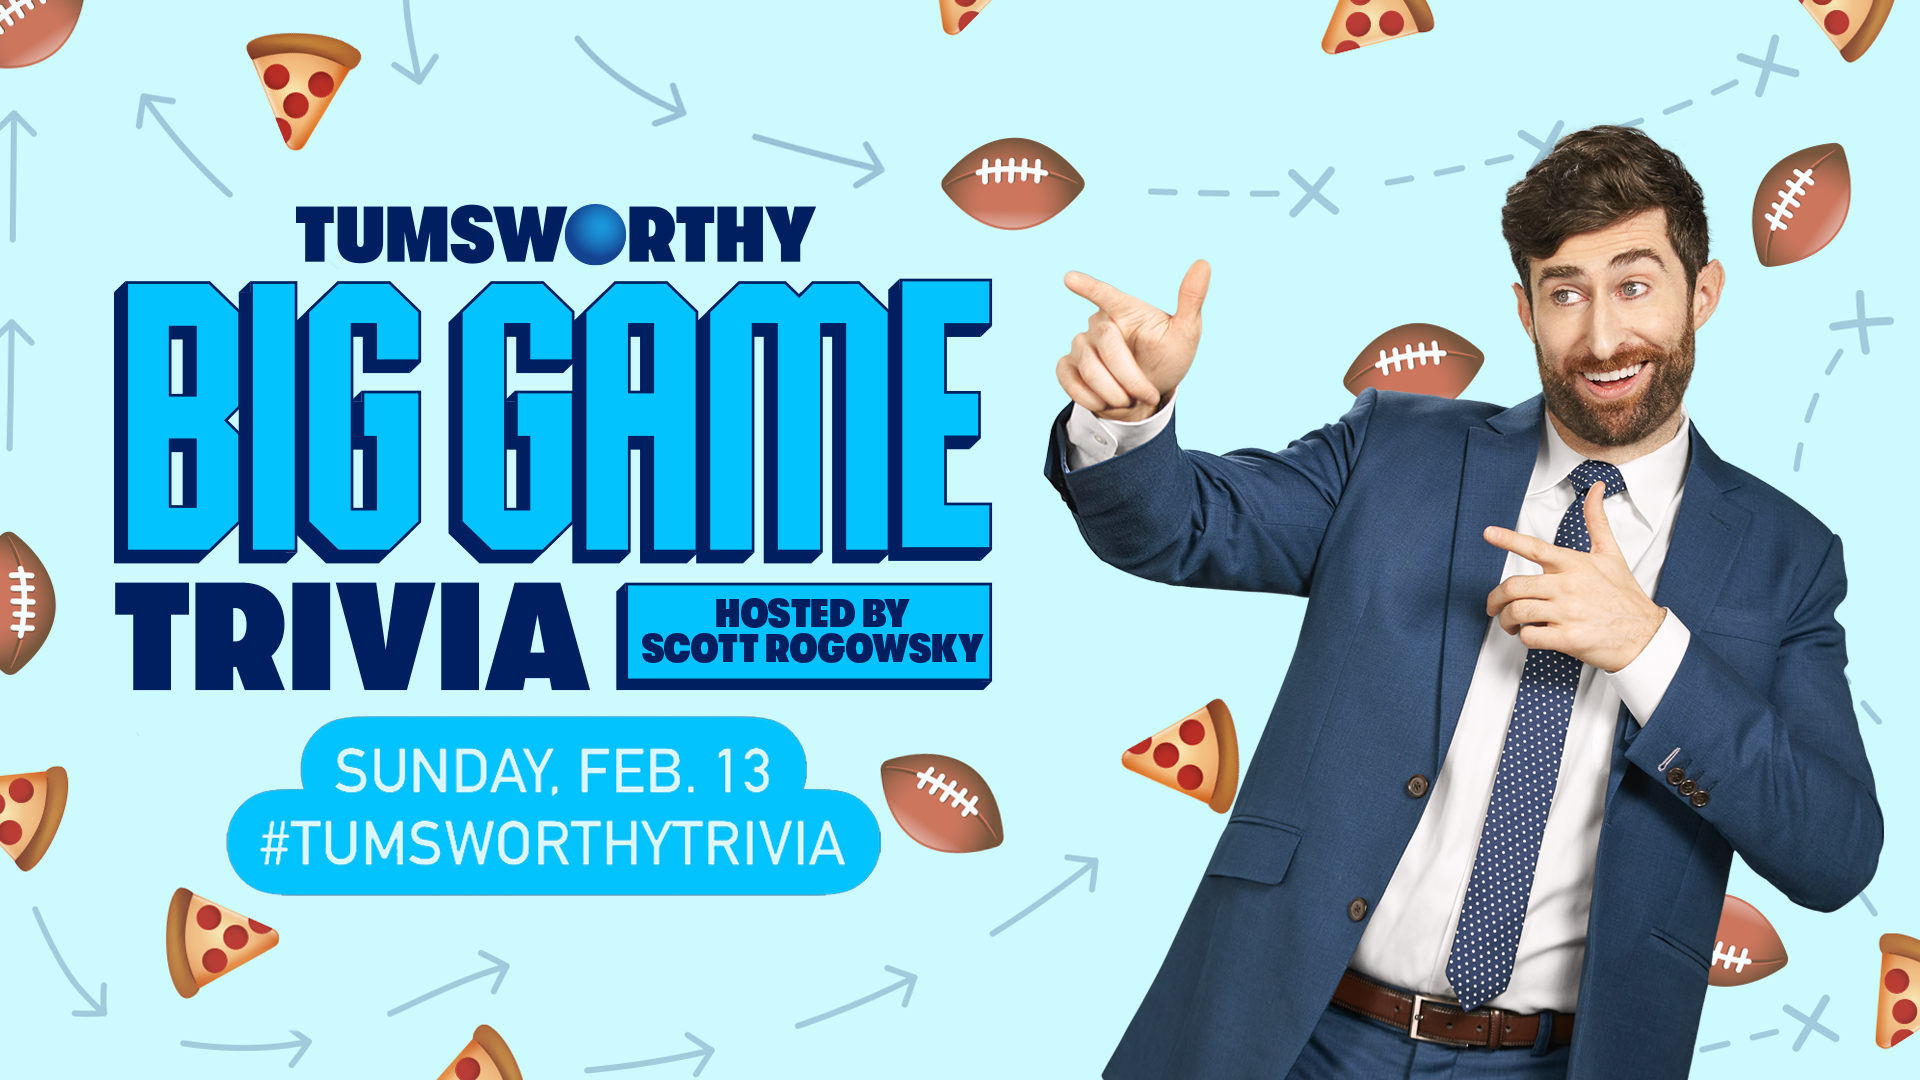 TUMSworthy Big Game Trivia hosted by comedian Scott Rogowsky kicks off February 13. Enter for a chance to win a share of <money>$88,000</money> in prizes via @TUMSOfficial. NO PURCHASE NECESSARY. To enter and for Official Rules: https://tums-biggametrivia.promo.eprize.com